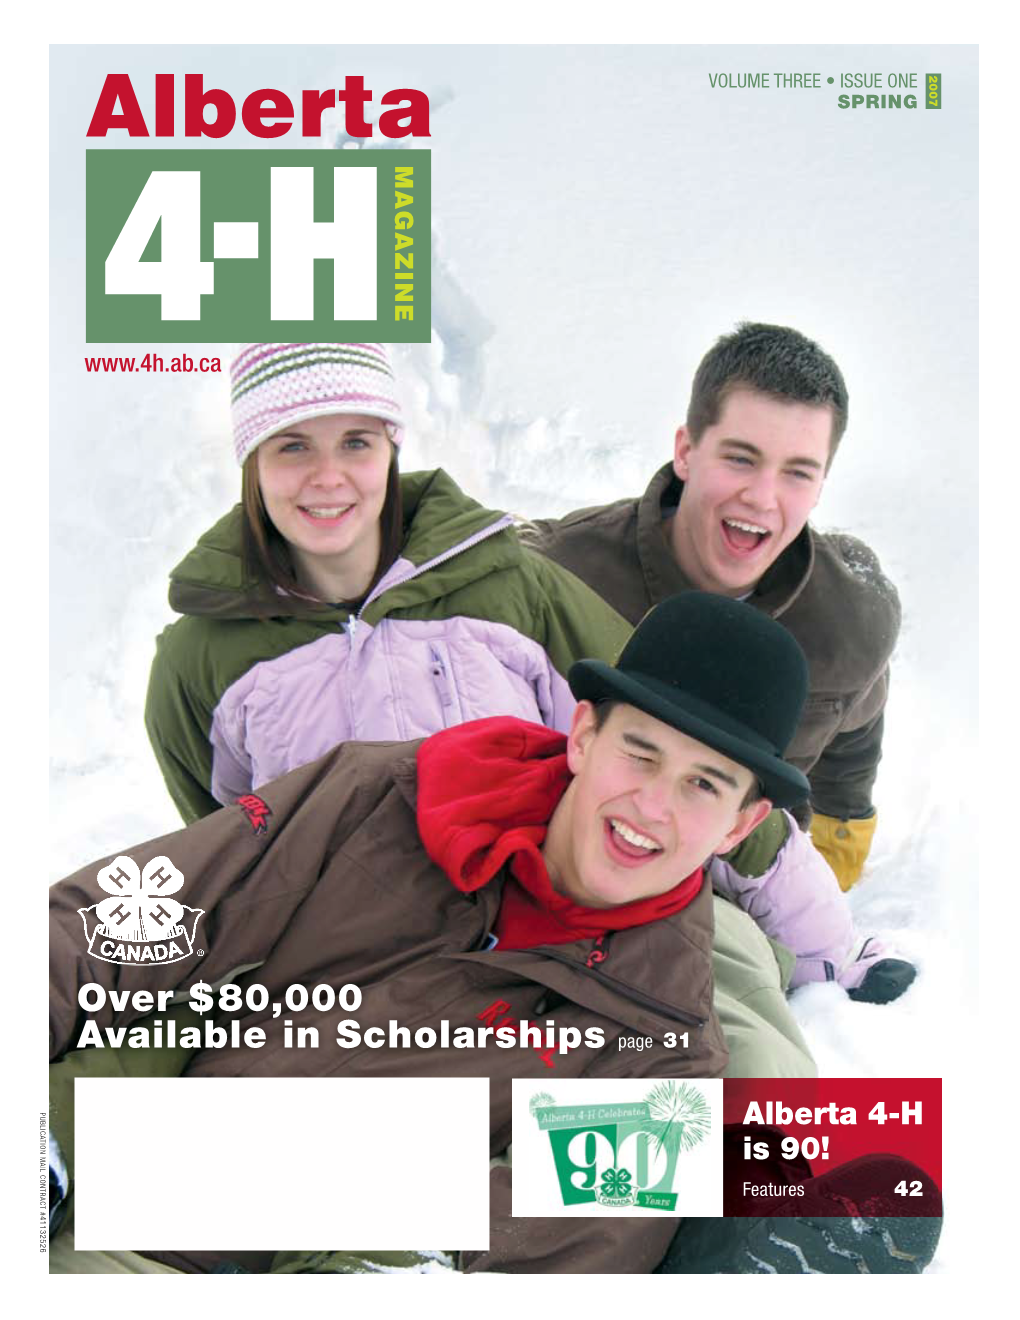 Alberta 4-H Magazine Susann Stone Manager, Marketing and Special Projects P: 780.682.2153 F: 780.682.3784